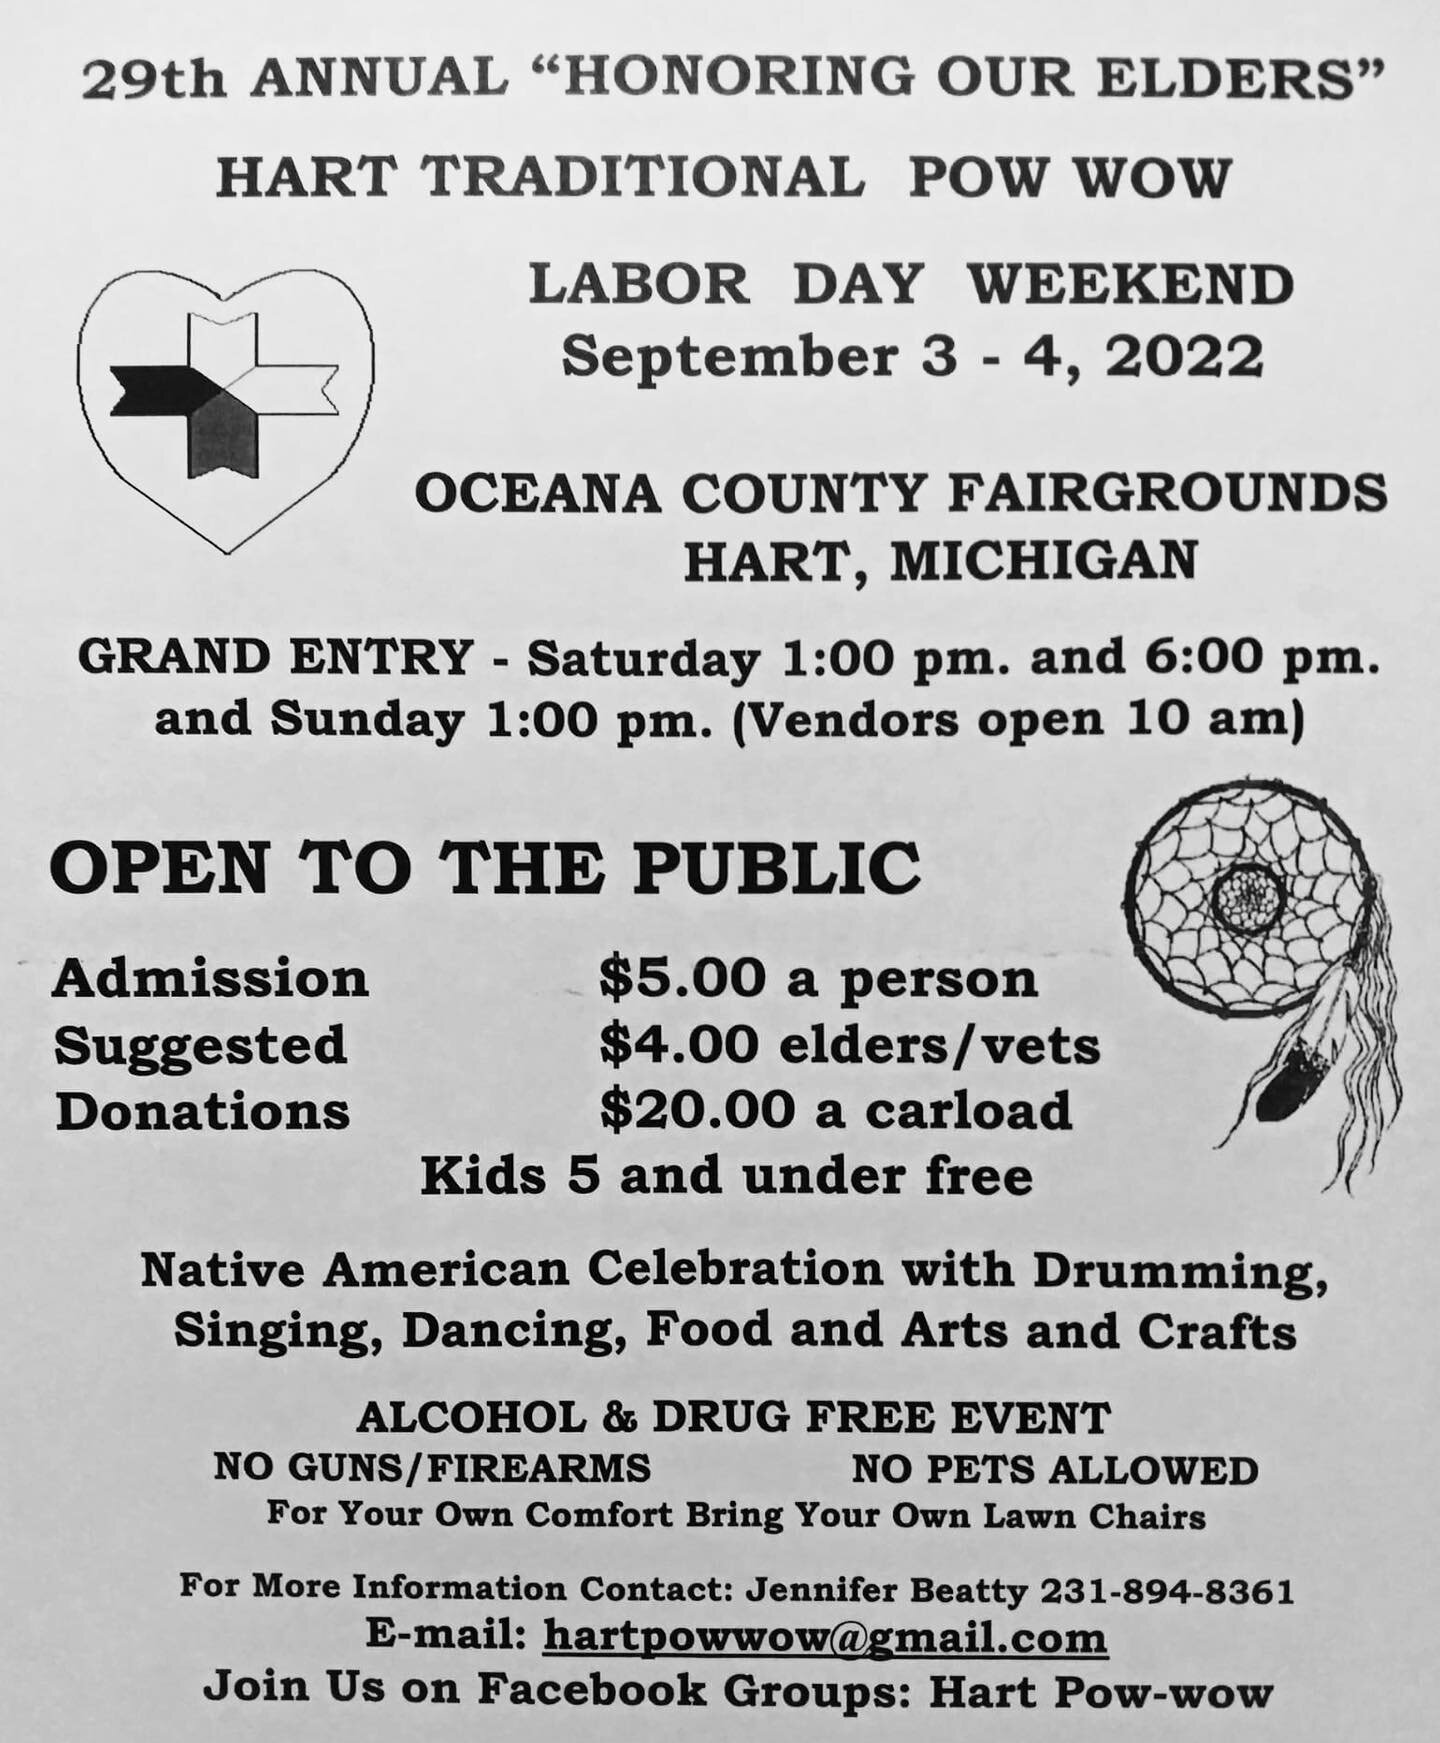 Gathering Thunder Foundation is honored to be an official sponsor of the 29th Annual &ldquo;Honoring Our Elders&rdquo; Hart Traditional Pow Wow.&rdquo; #gatheringthunderfoundation #honoringourelders #traditionalpowwow #hartpowwow